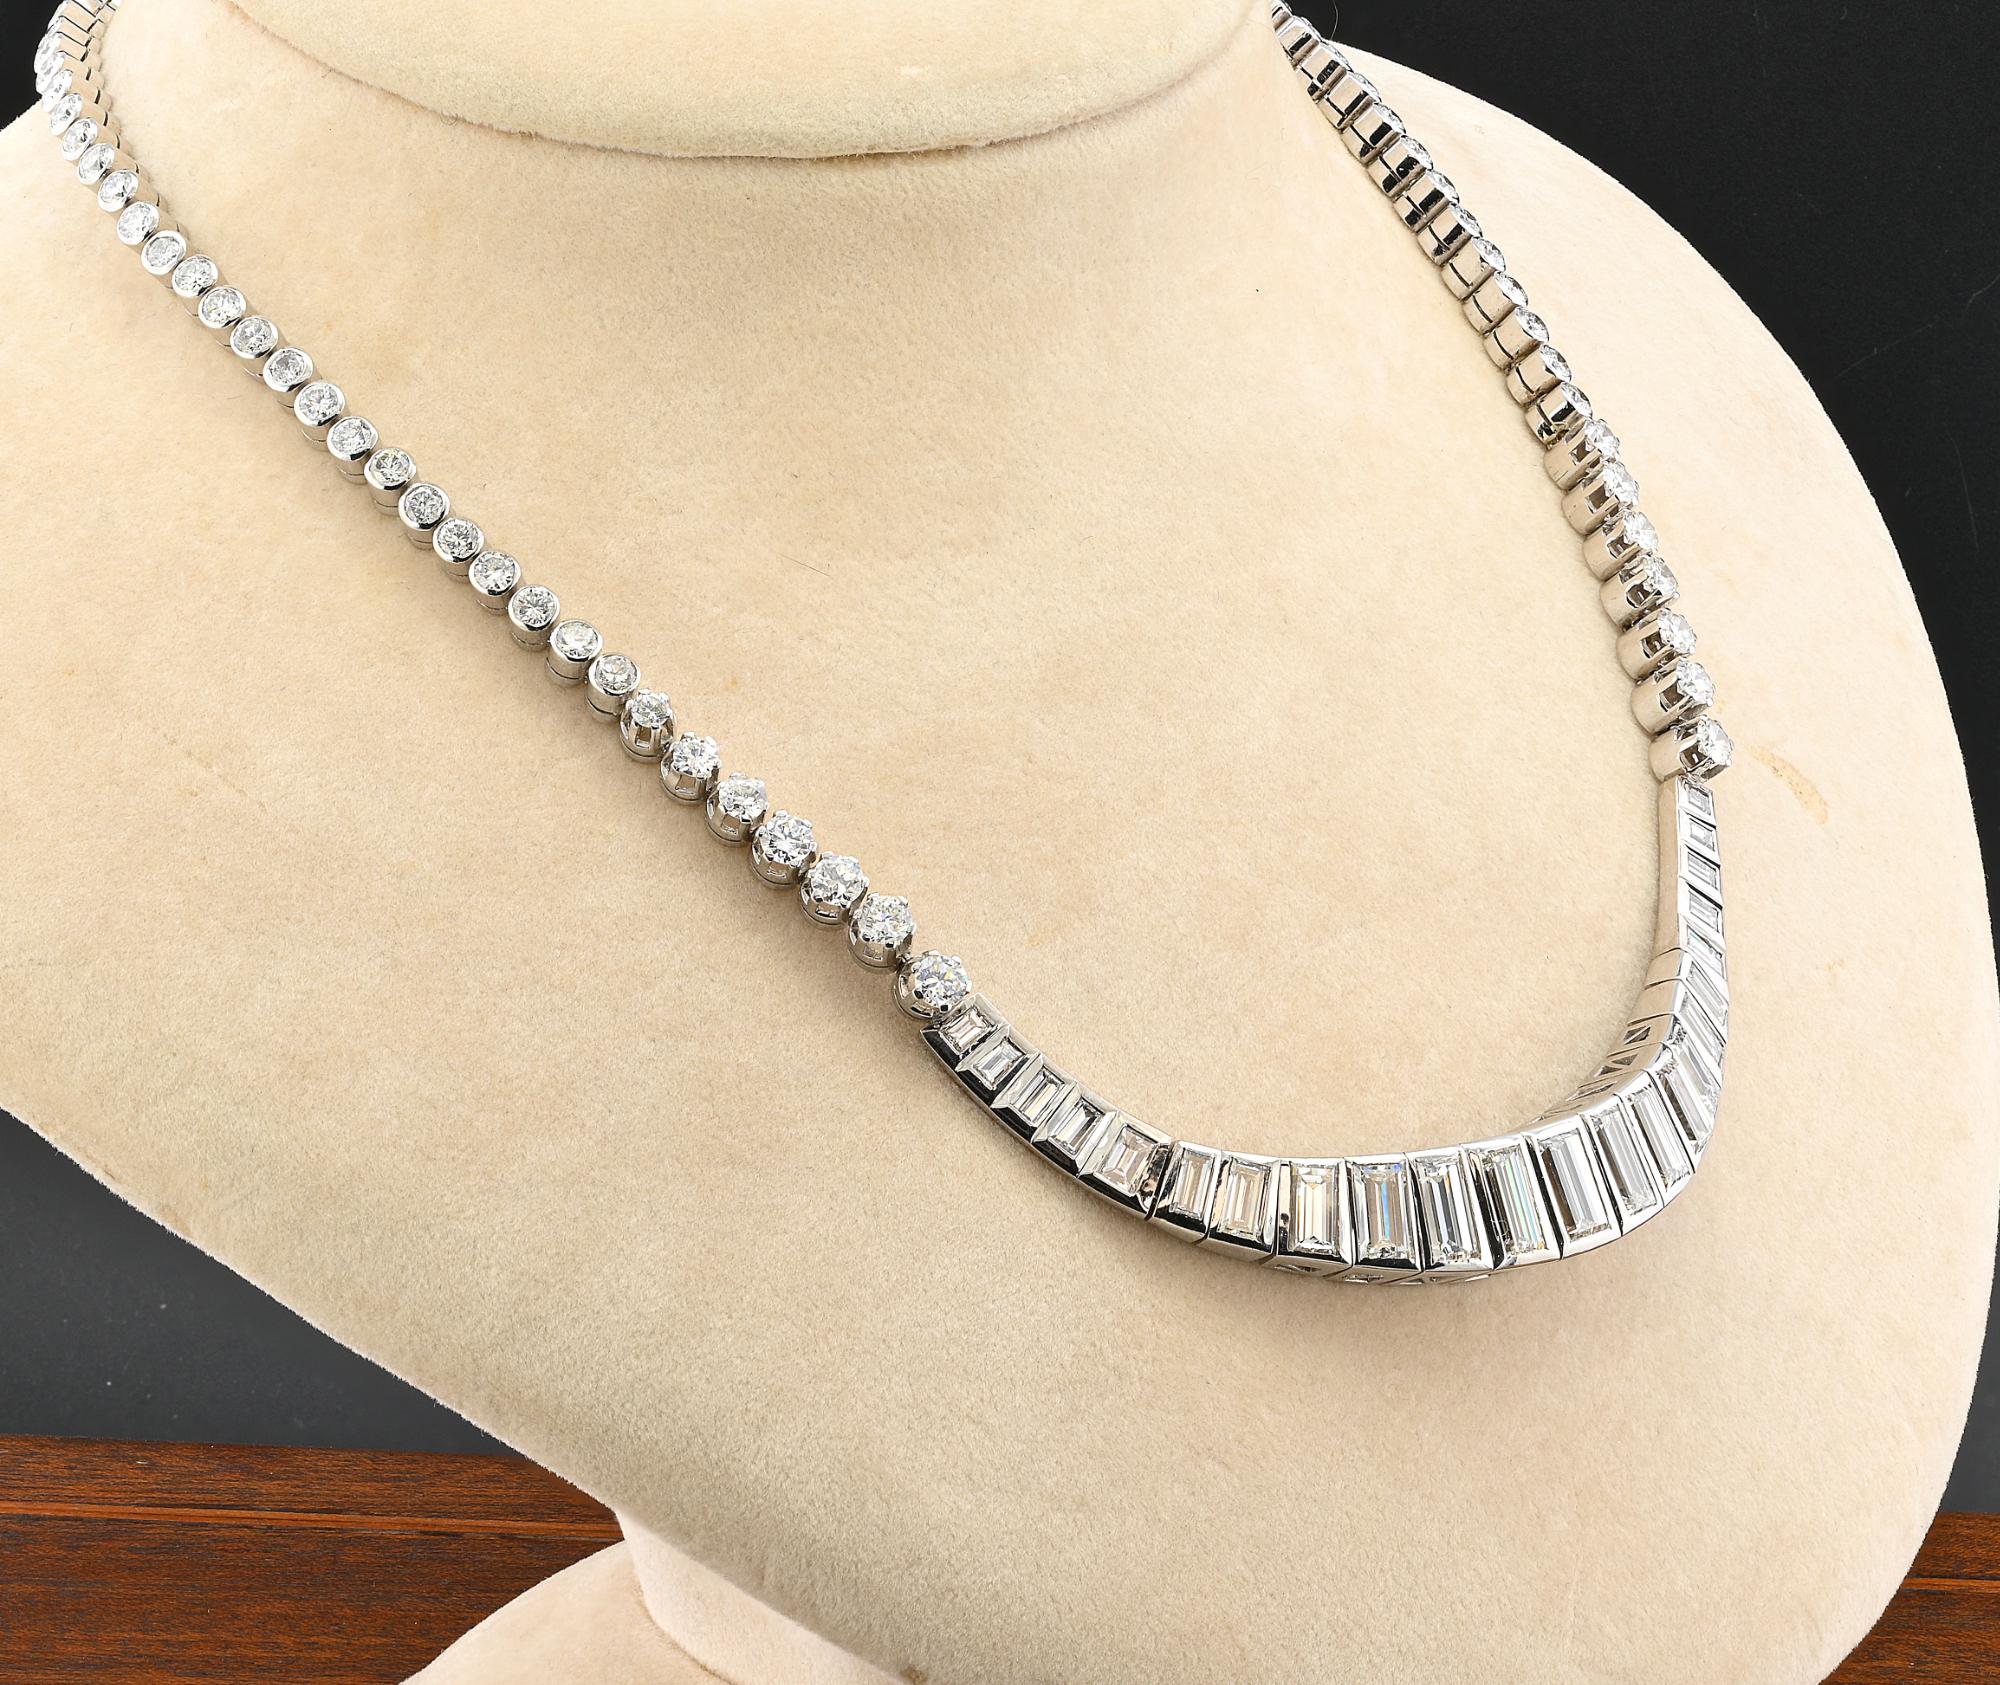 Late Deco 13.10 Ct Diamond Riviere Necklace Platinum 18 KT  In Good Condition For Sale In Napoli, IT